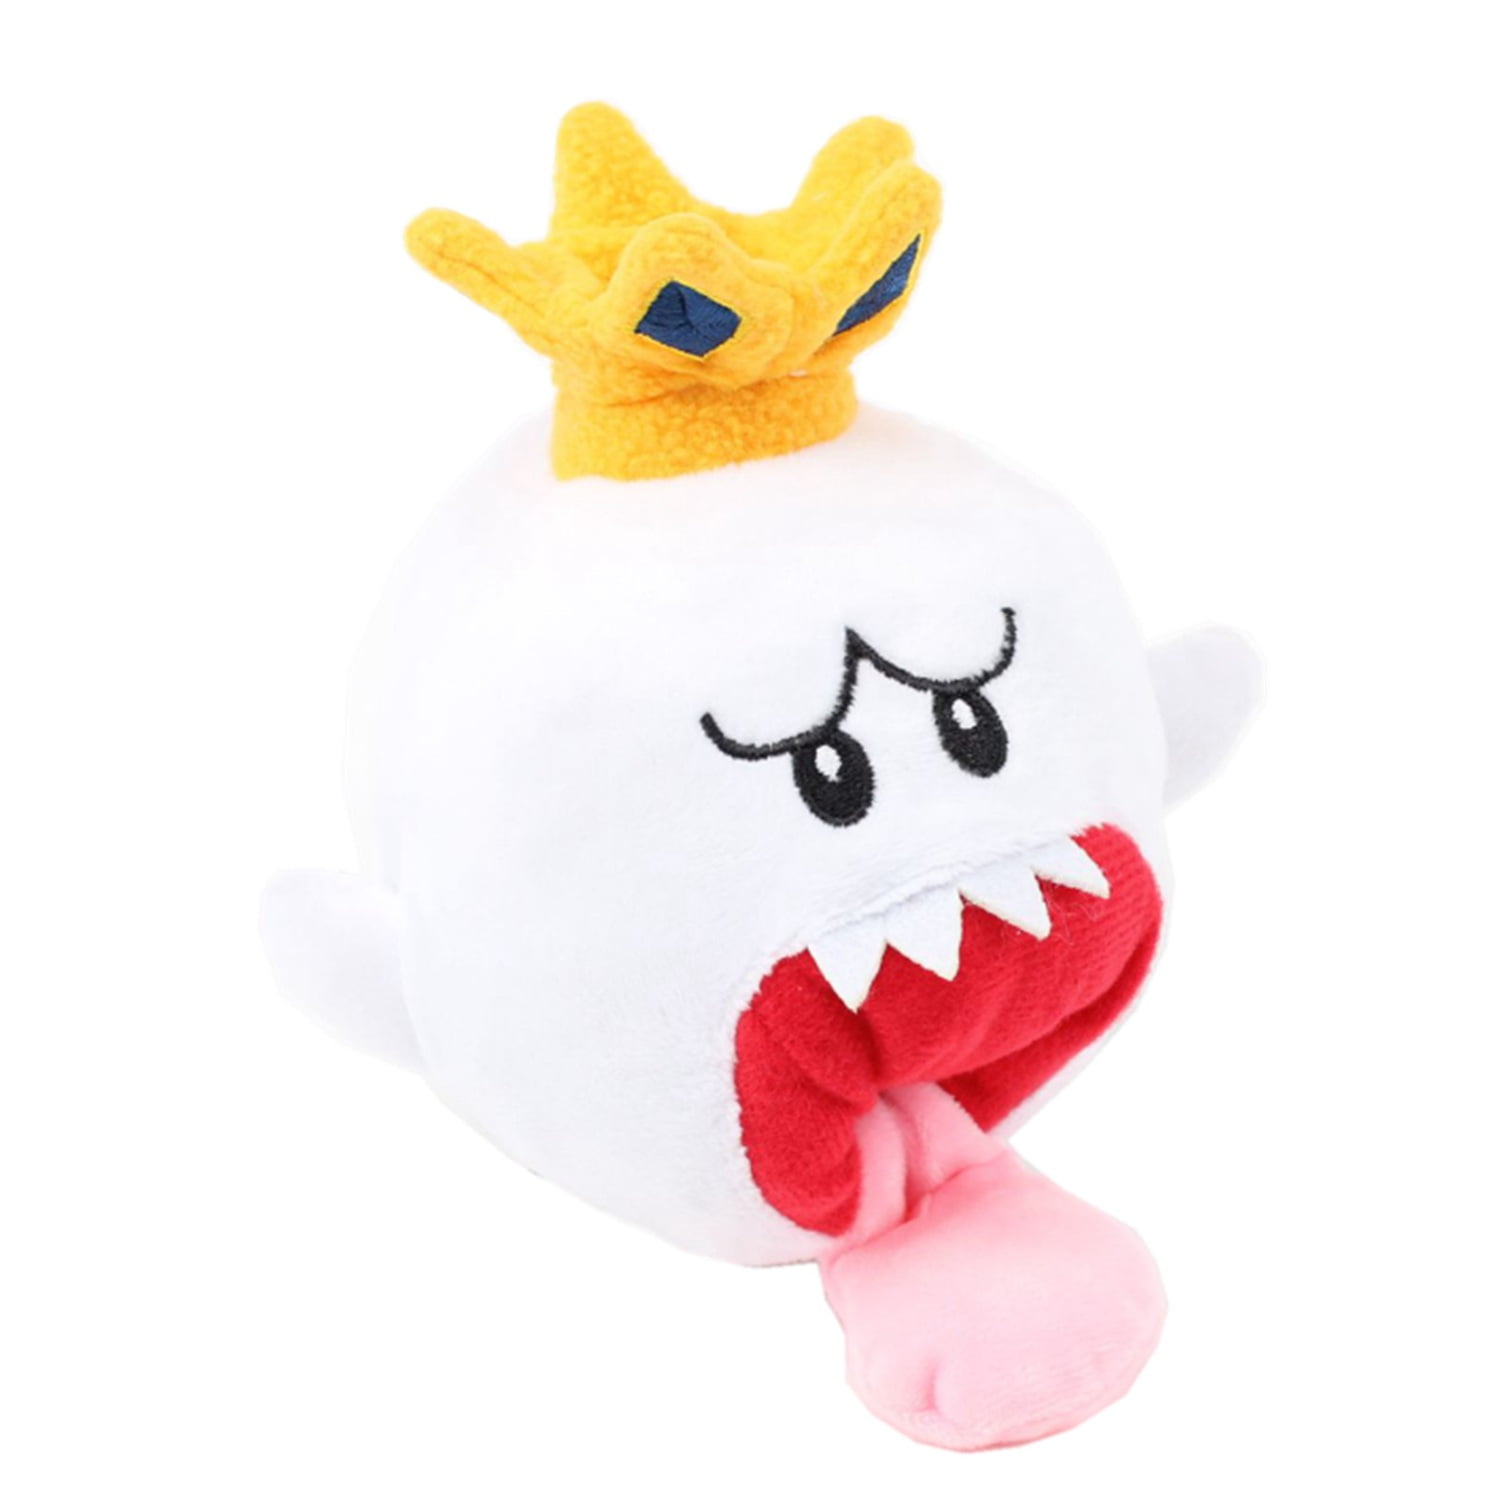 uiuoutoy Super Mario Ghost King Boo Plush Toy Stuffed Animal Doll Gift ...